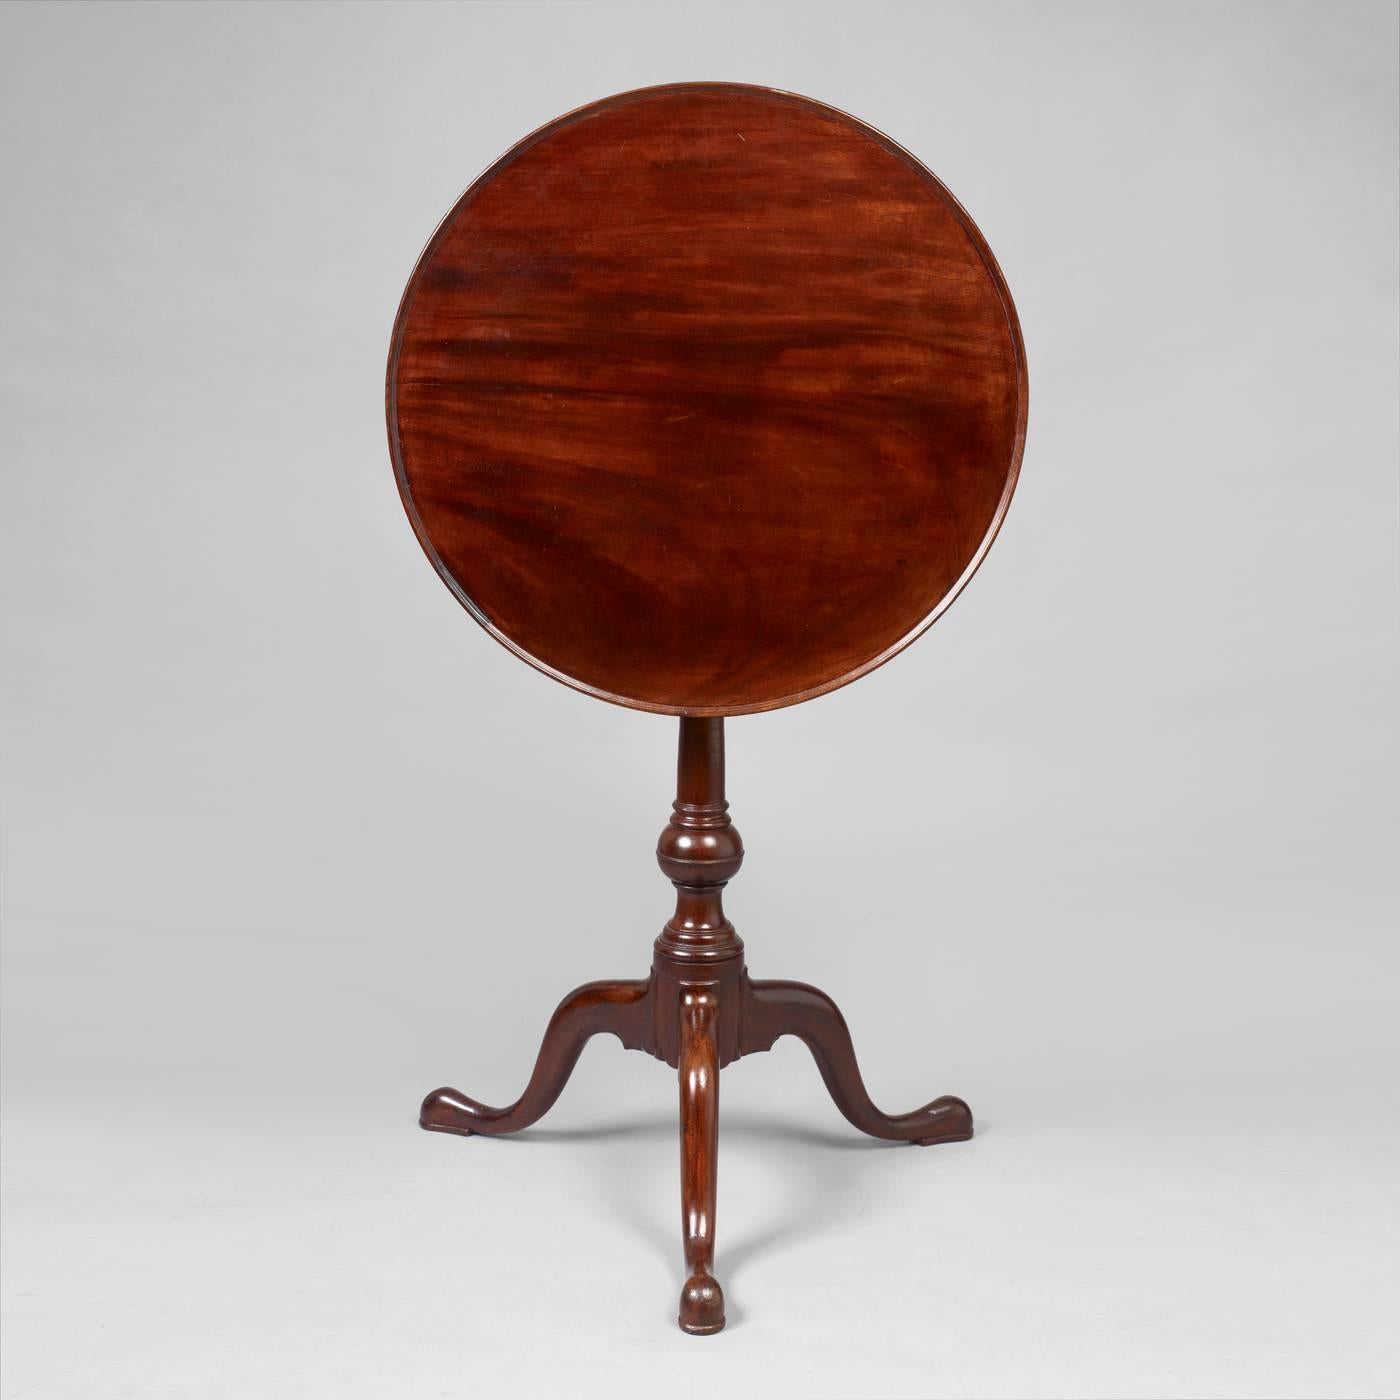 Philadelphia, circa 1760-1775. Mahogany Condition: Fine condition, minor imperfections. See full condition report. Provenance: Private collection, Israel Sack, New York, 1970s, Illustrated: American Antiques from The Israel Sack Collection, Vol. II,